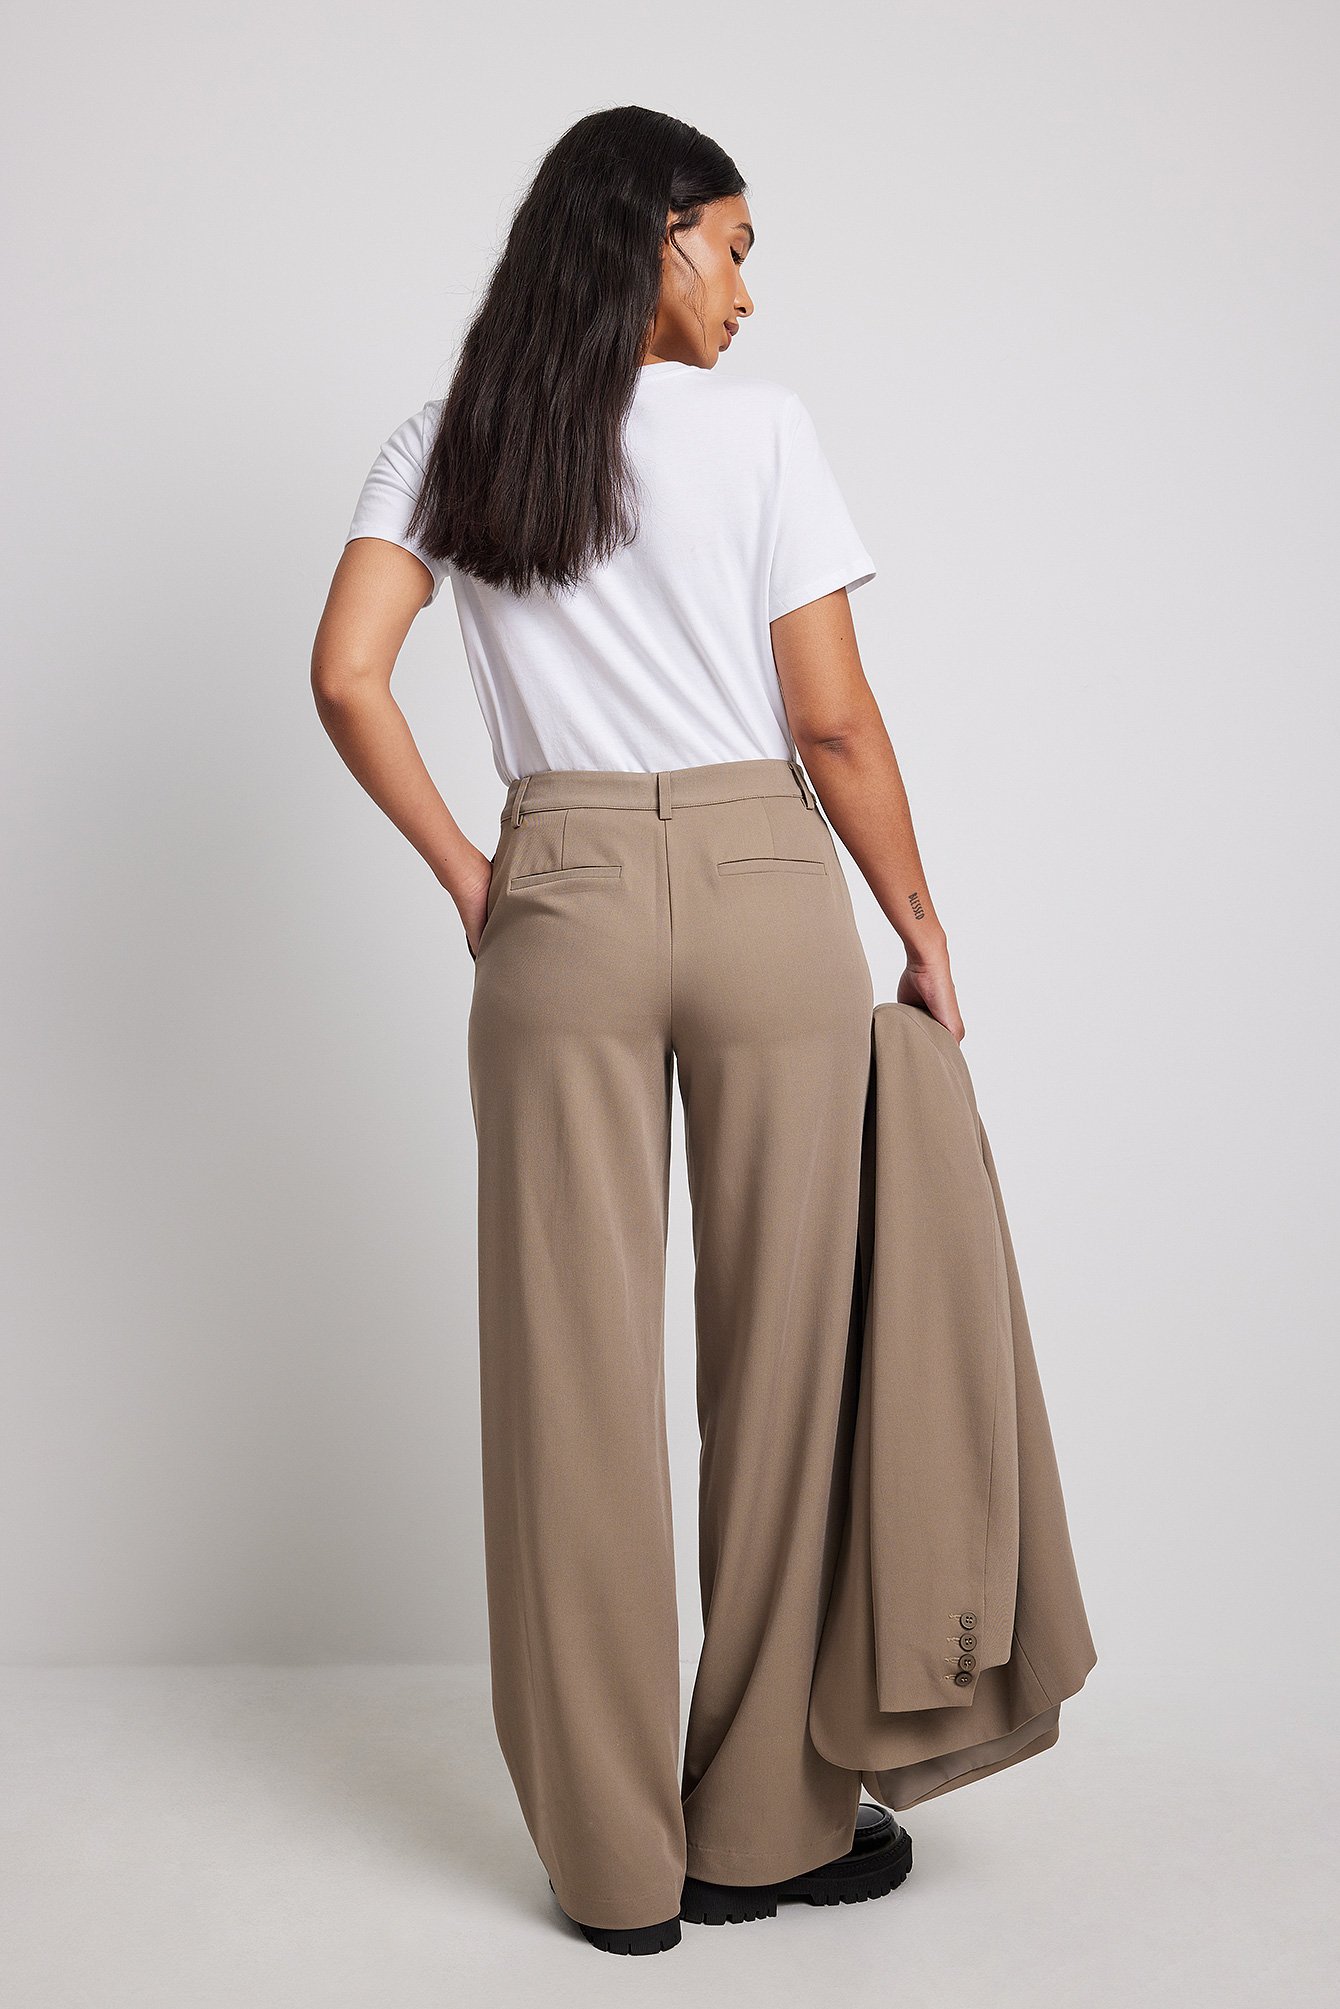 33034 31034 29034 27034 Womens ELASTICATED Bootcut RIBBED  Stretch TROUSERS UK Sizes 628  eBay